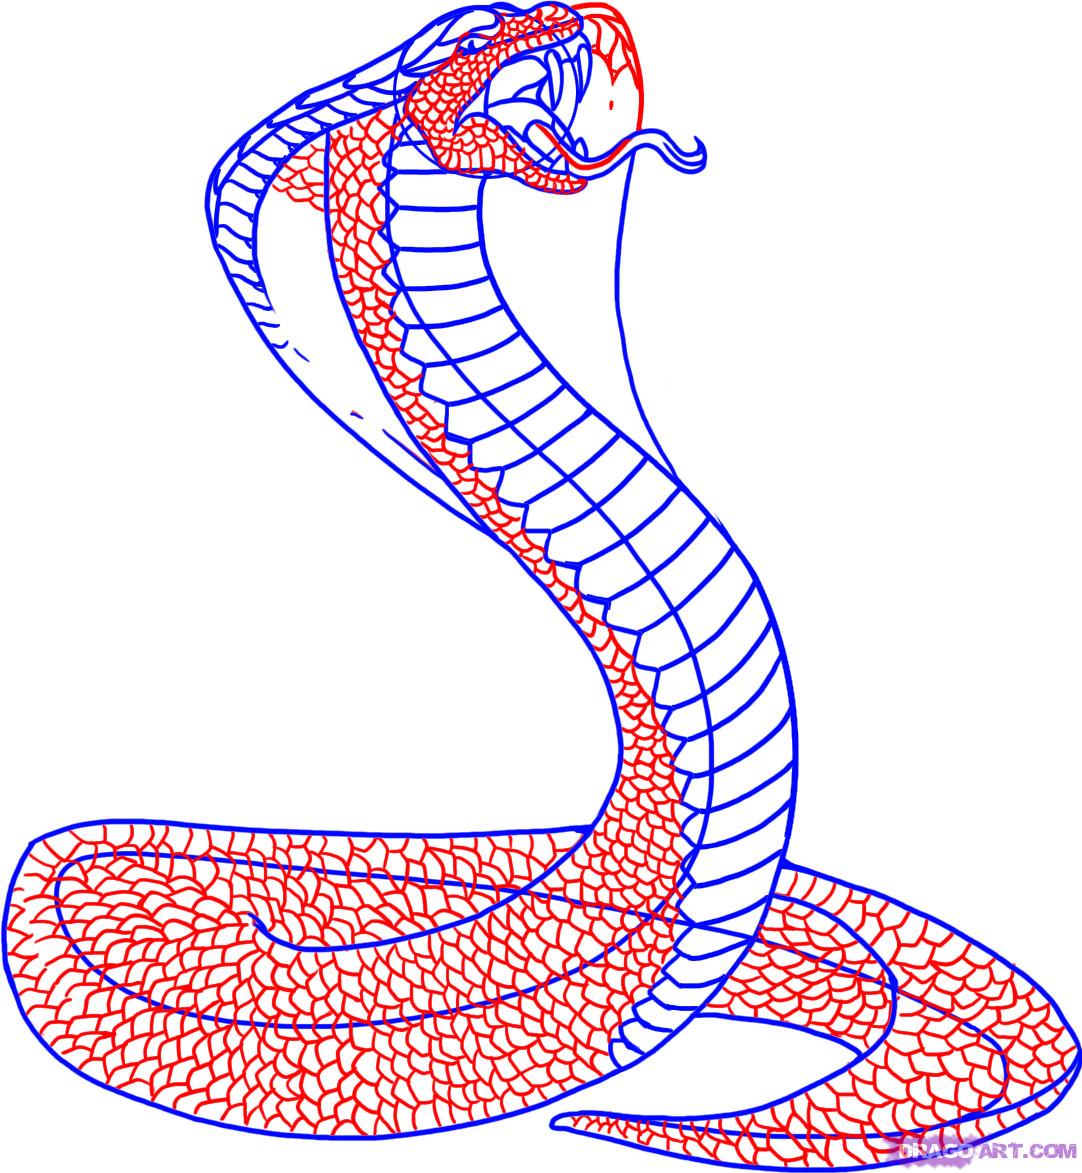 How To Draw A Snake, King Cobra, Step by Step, Snakes, Animals ...